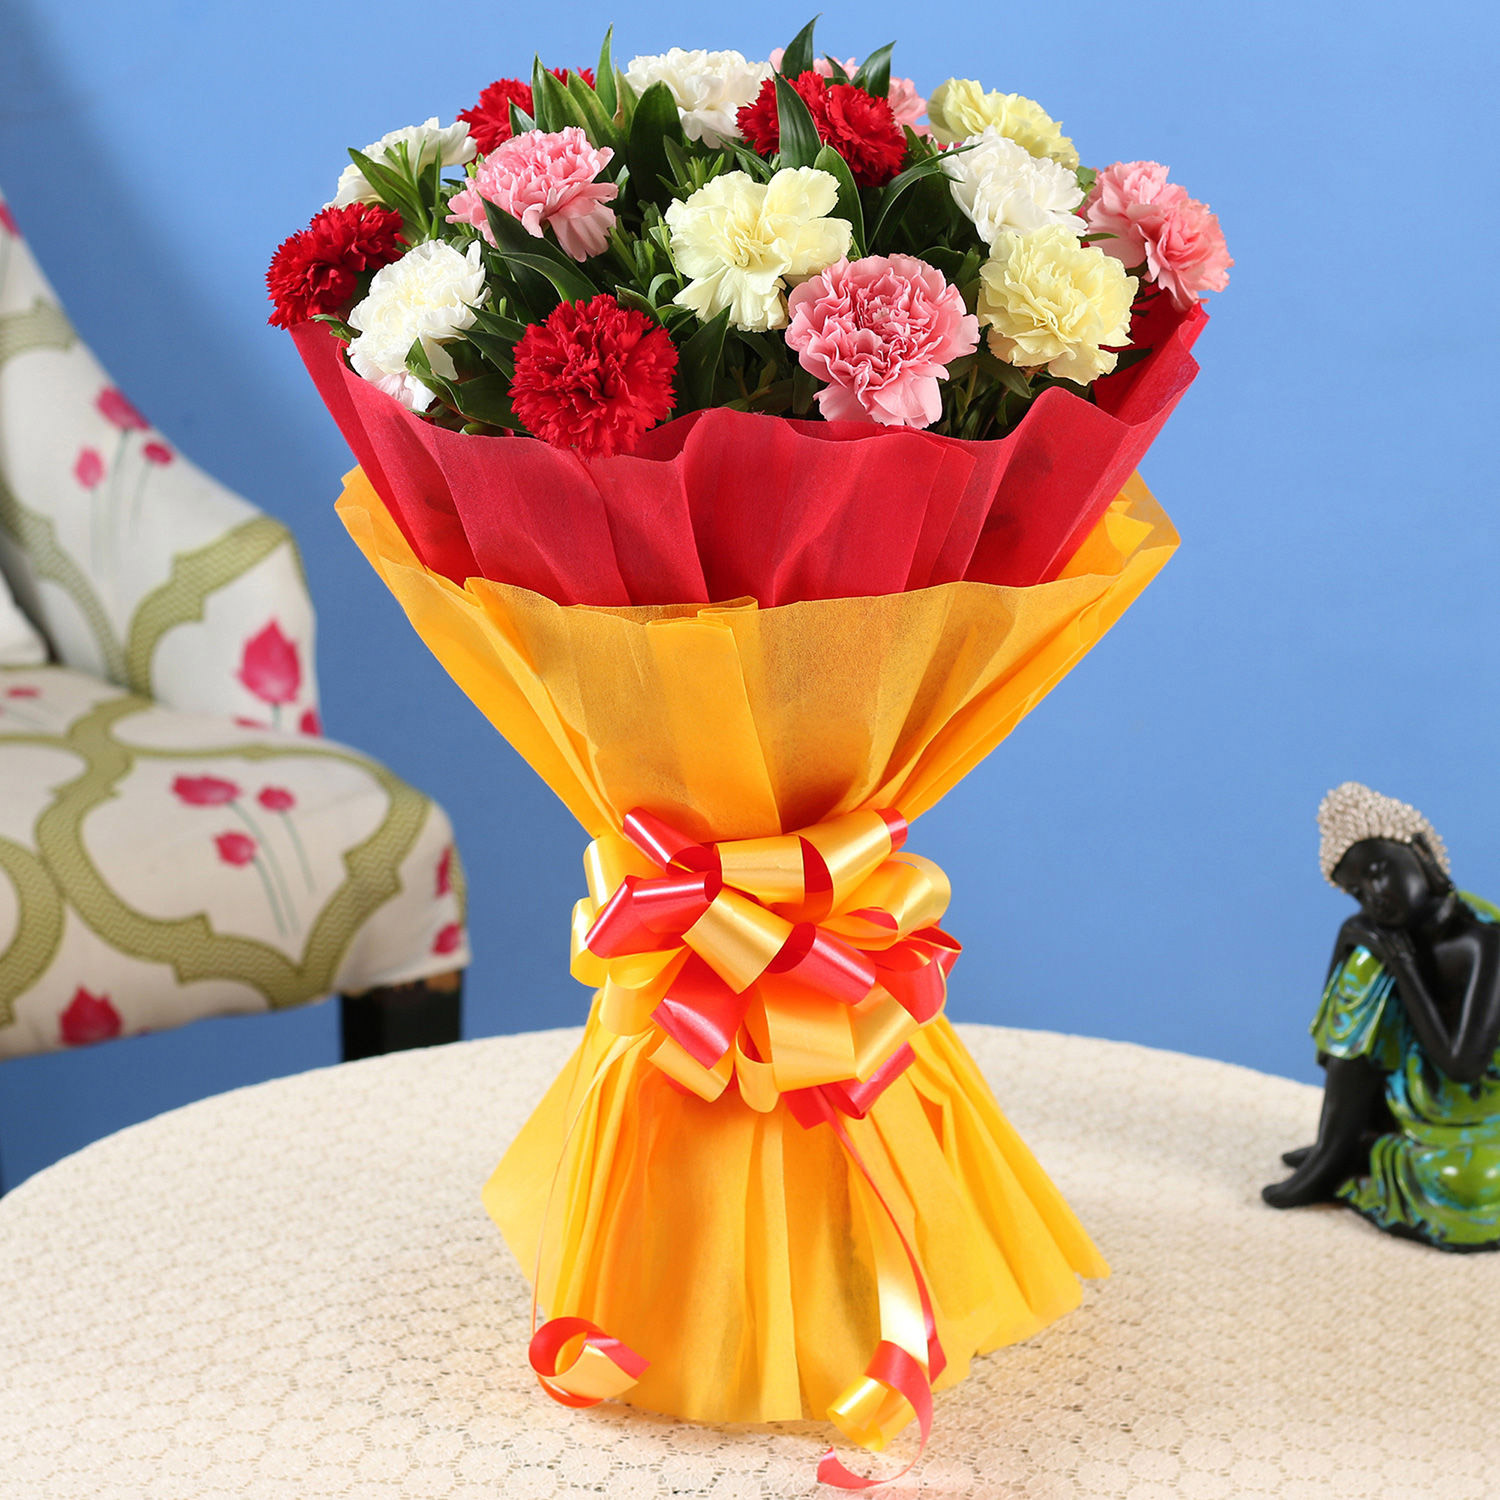 Online Mixed Carnations Bouquet Medium With Moet Champagne Ml Gift Delivery In Singapore